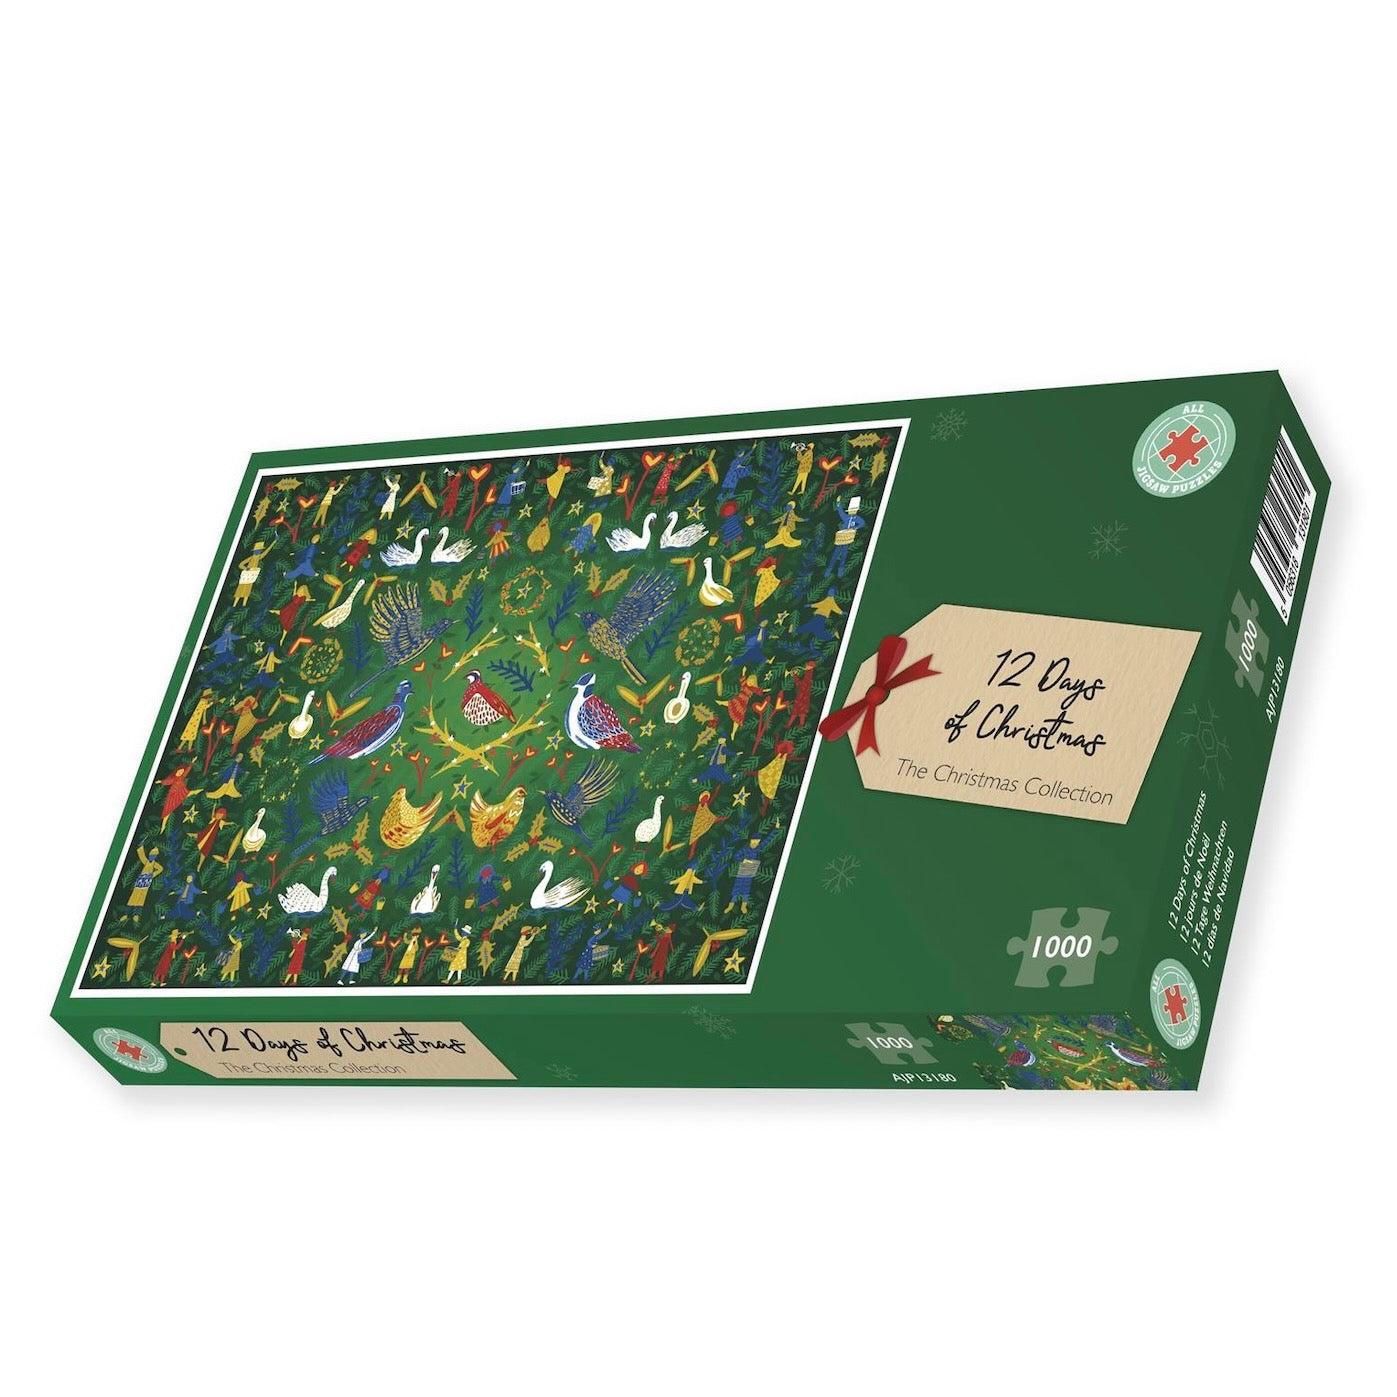 12 days of Christmas Jigsaw Puzzle